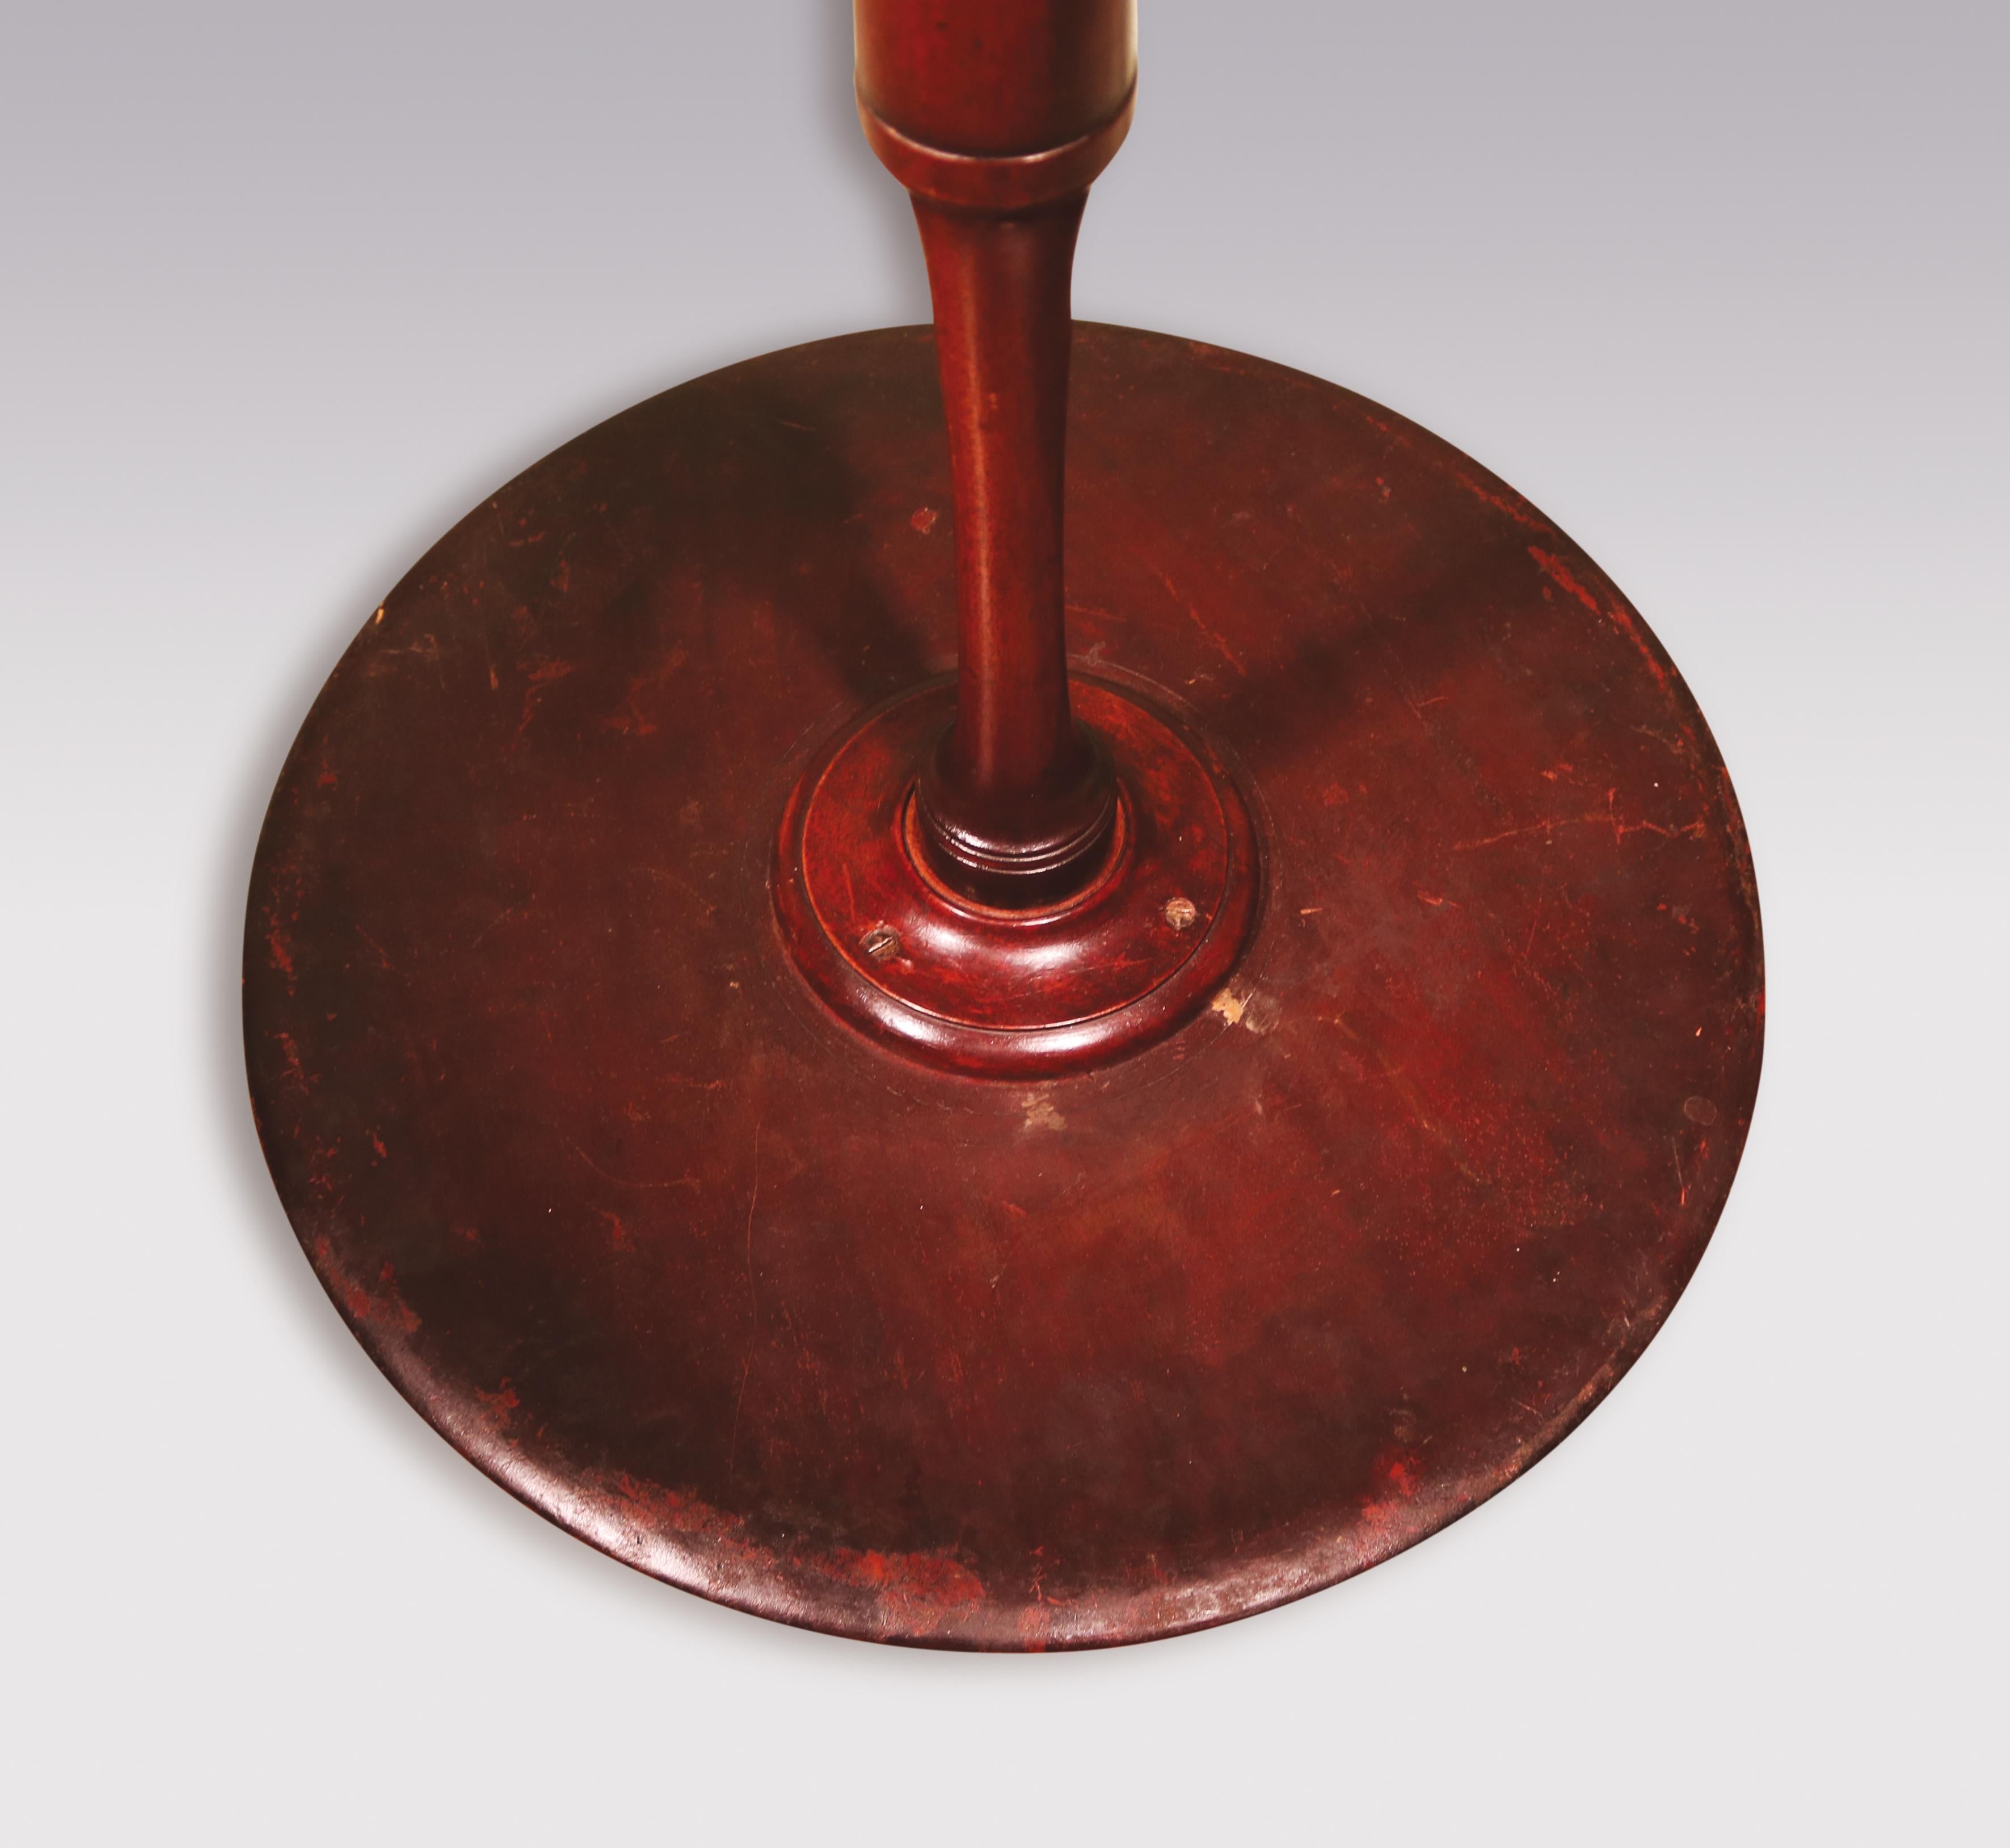 A George III period figured mahogany tripod table having circular 'dish' top, raised on vase-turned stem, supported on triple sided umbrella shaped legs, ending on spade toes.